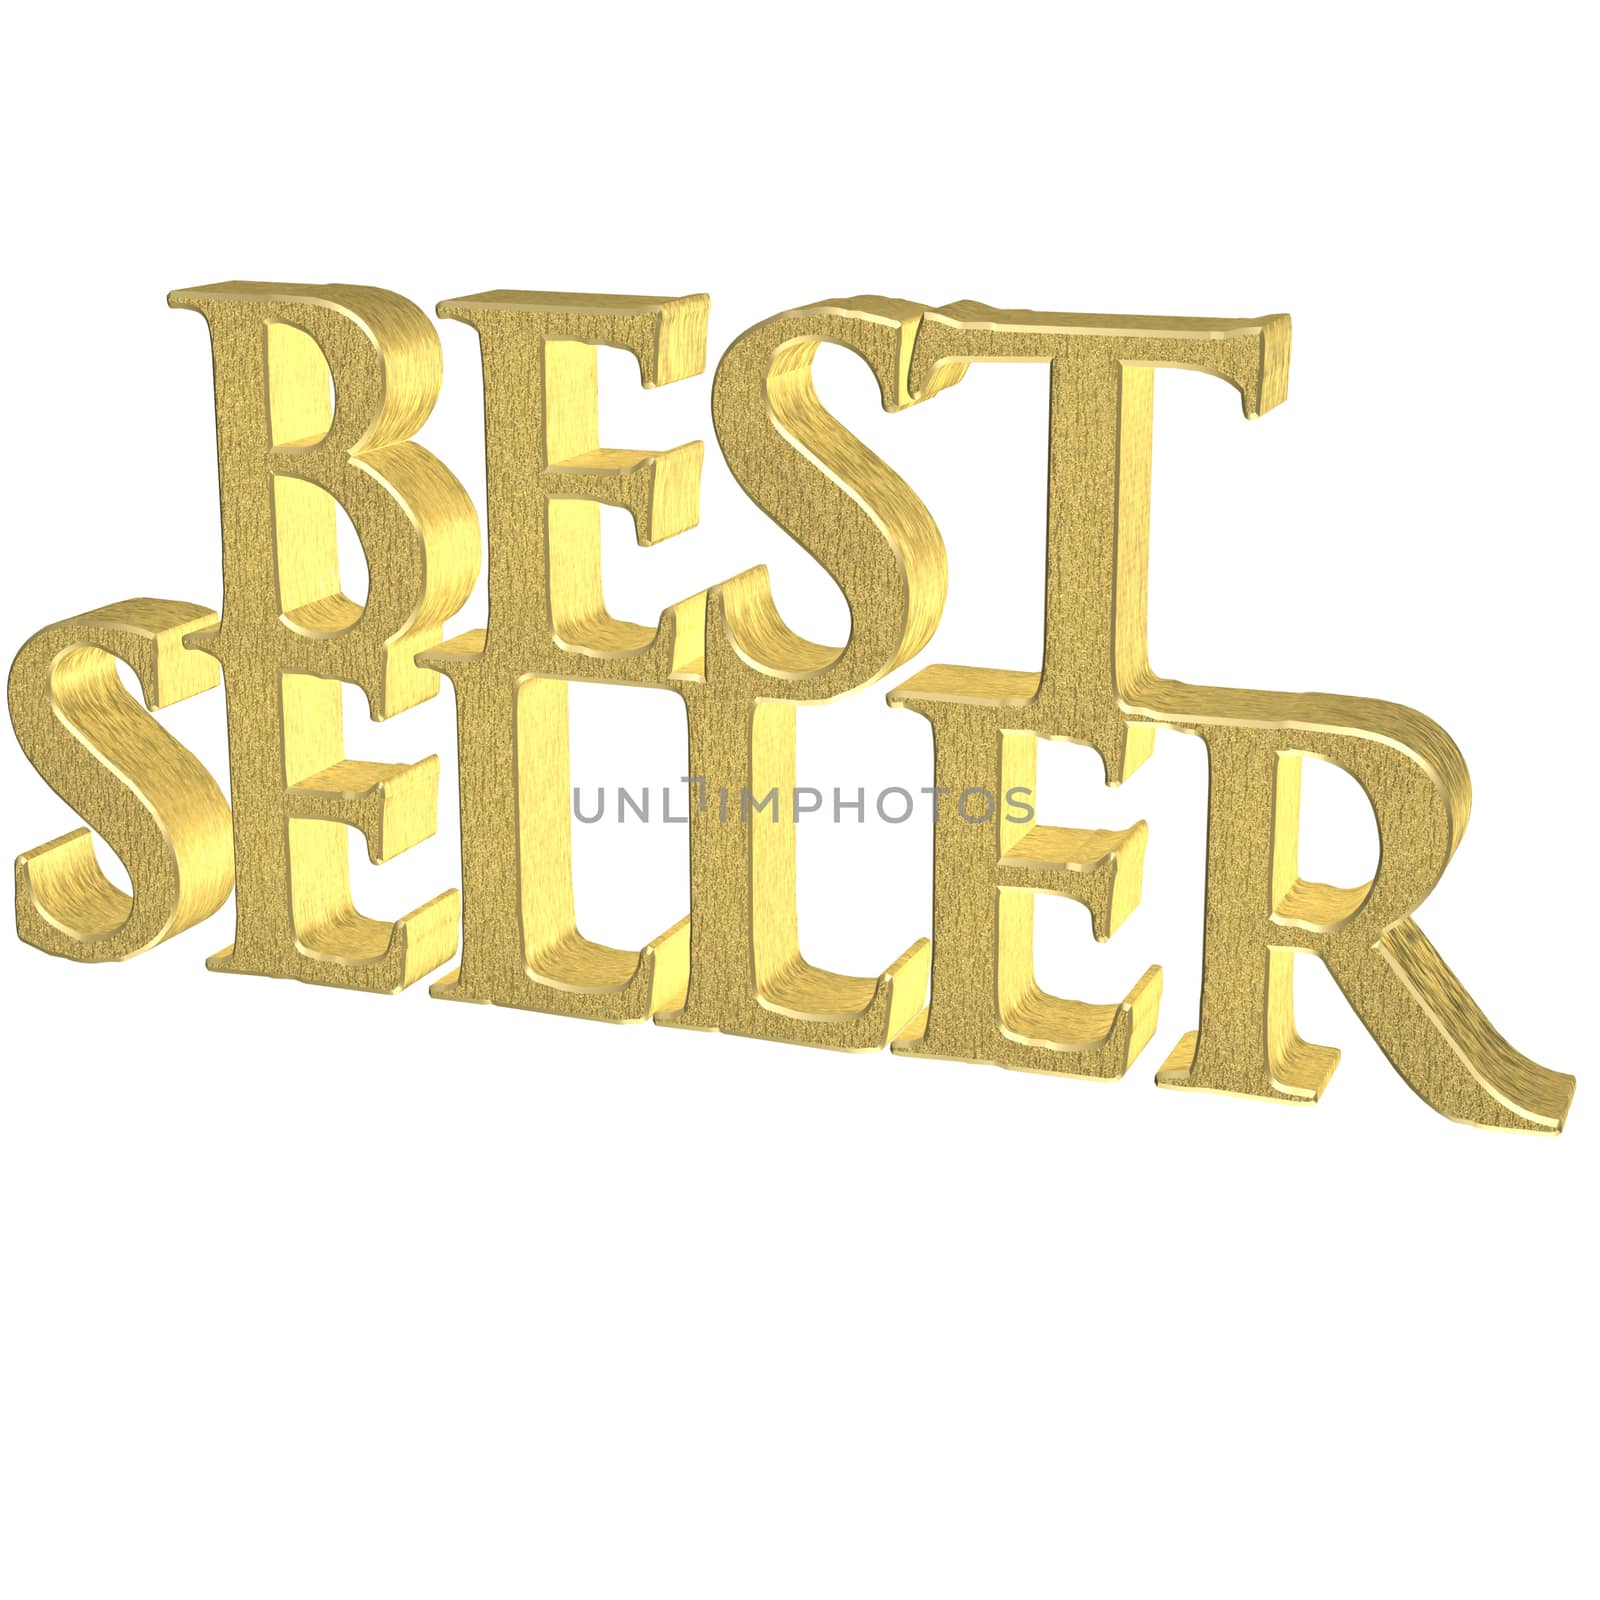 Glossy gold three-dimensional inscription Best seller as a sign.